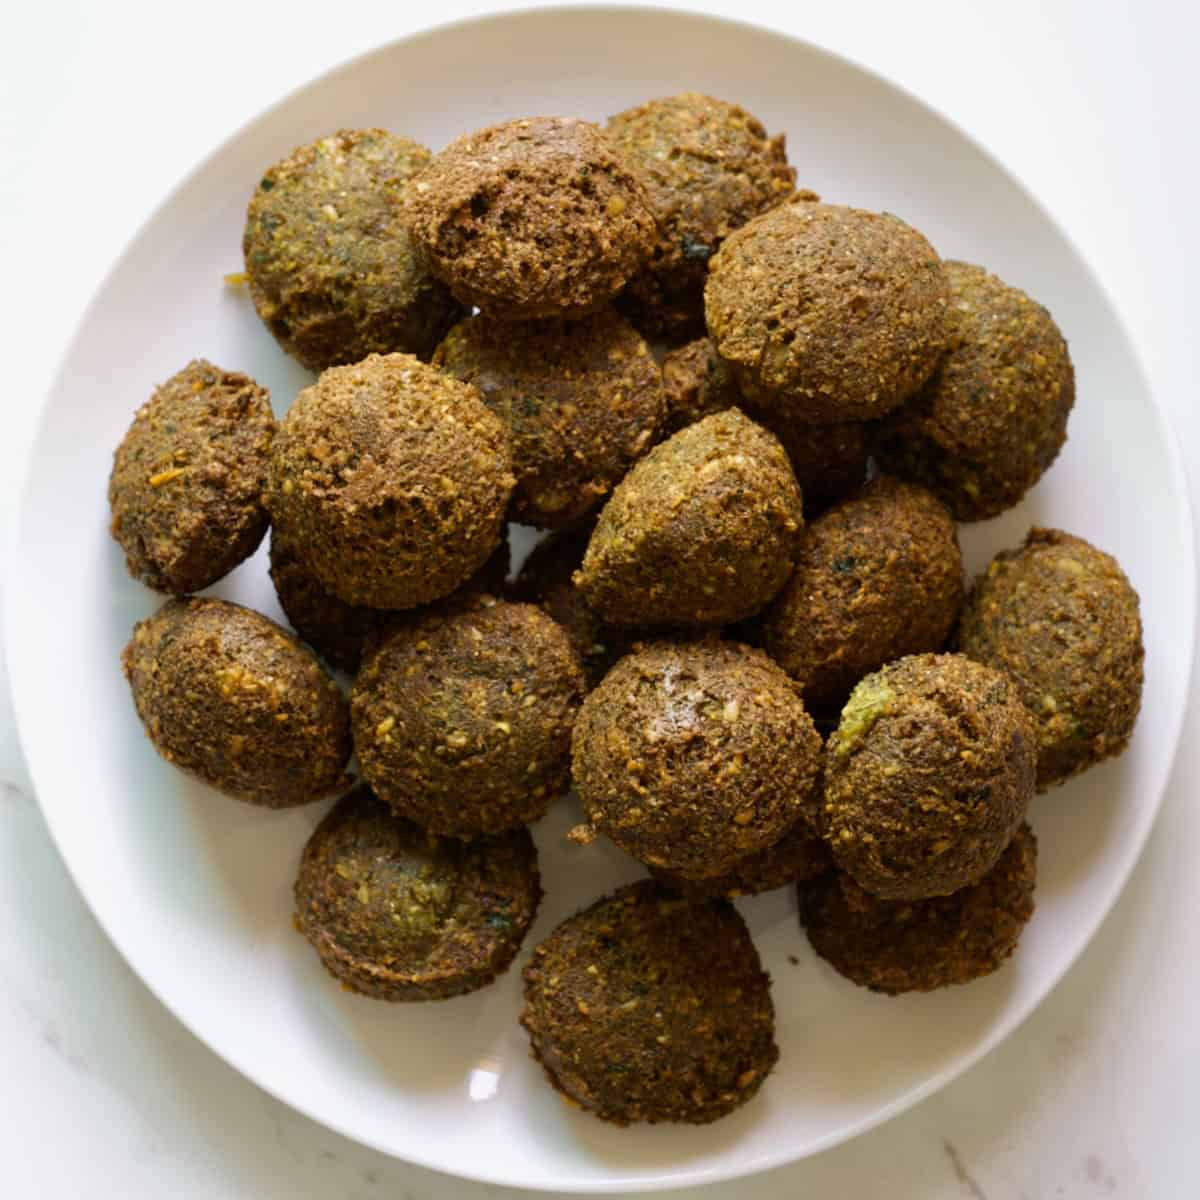 A plate with homemade falafels